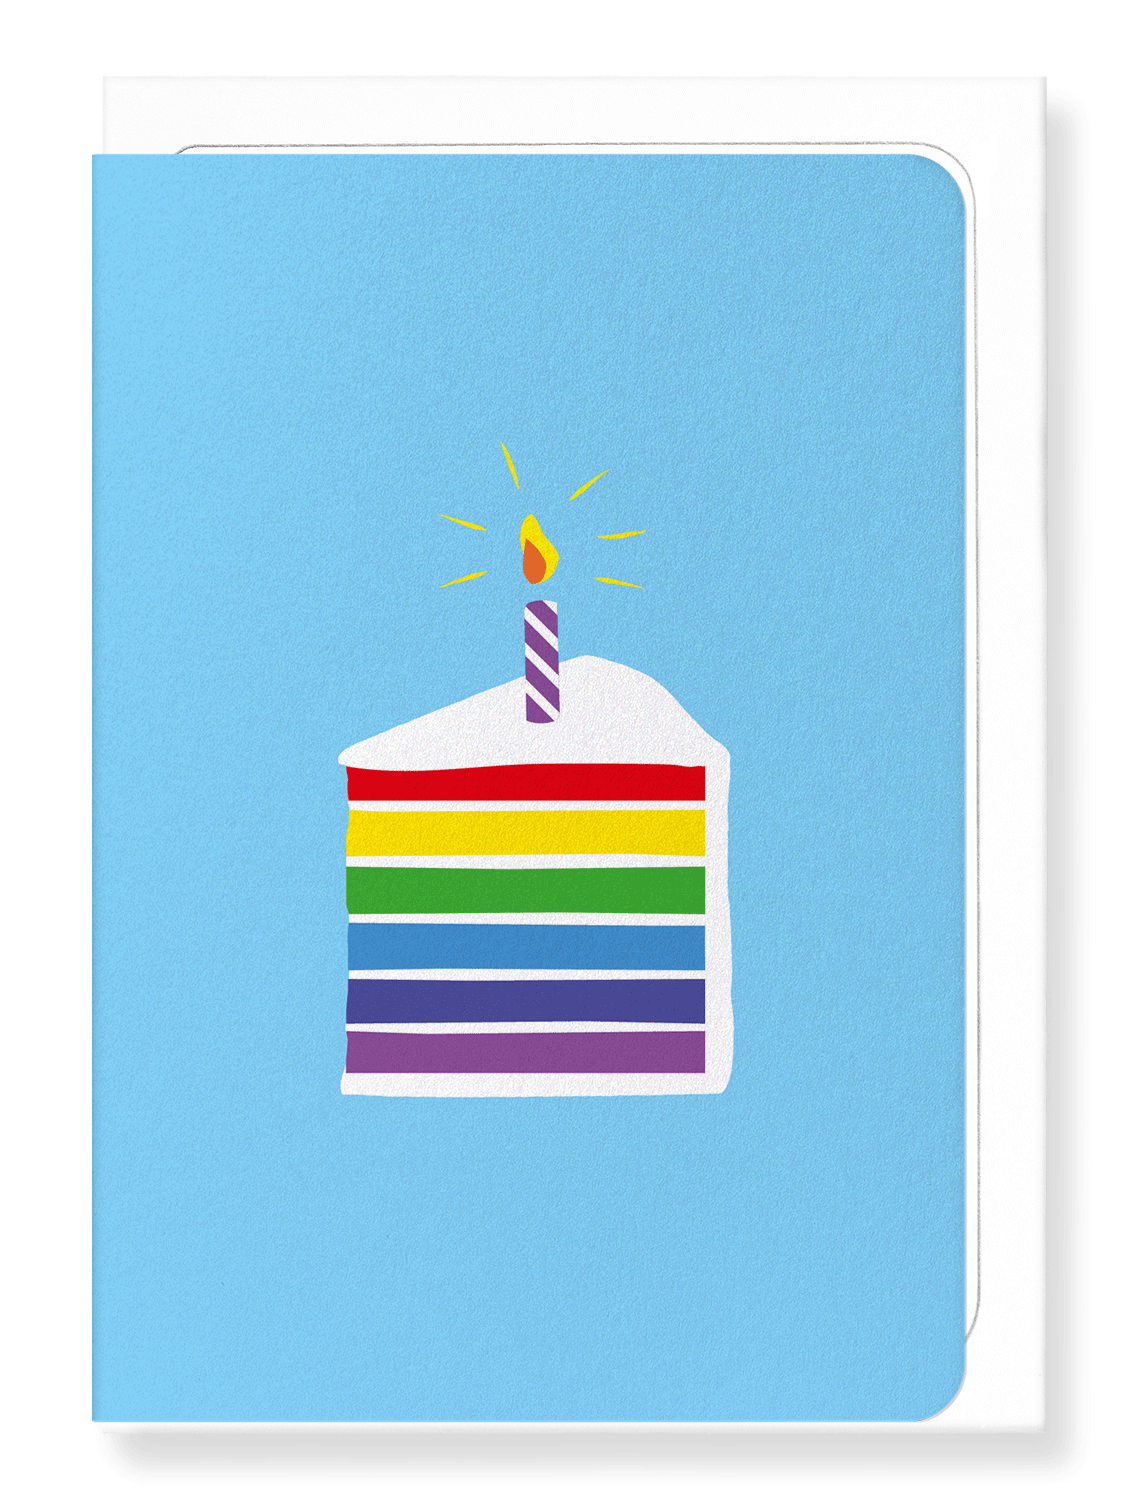 Ezen Designs - Rainbow cake in blue - Greeting Card - Front